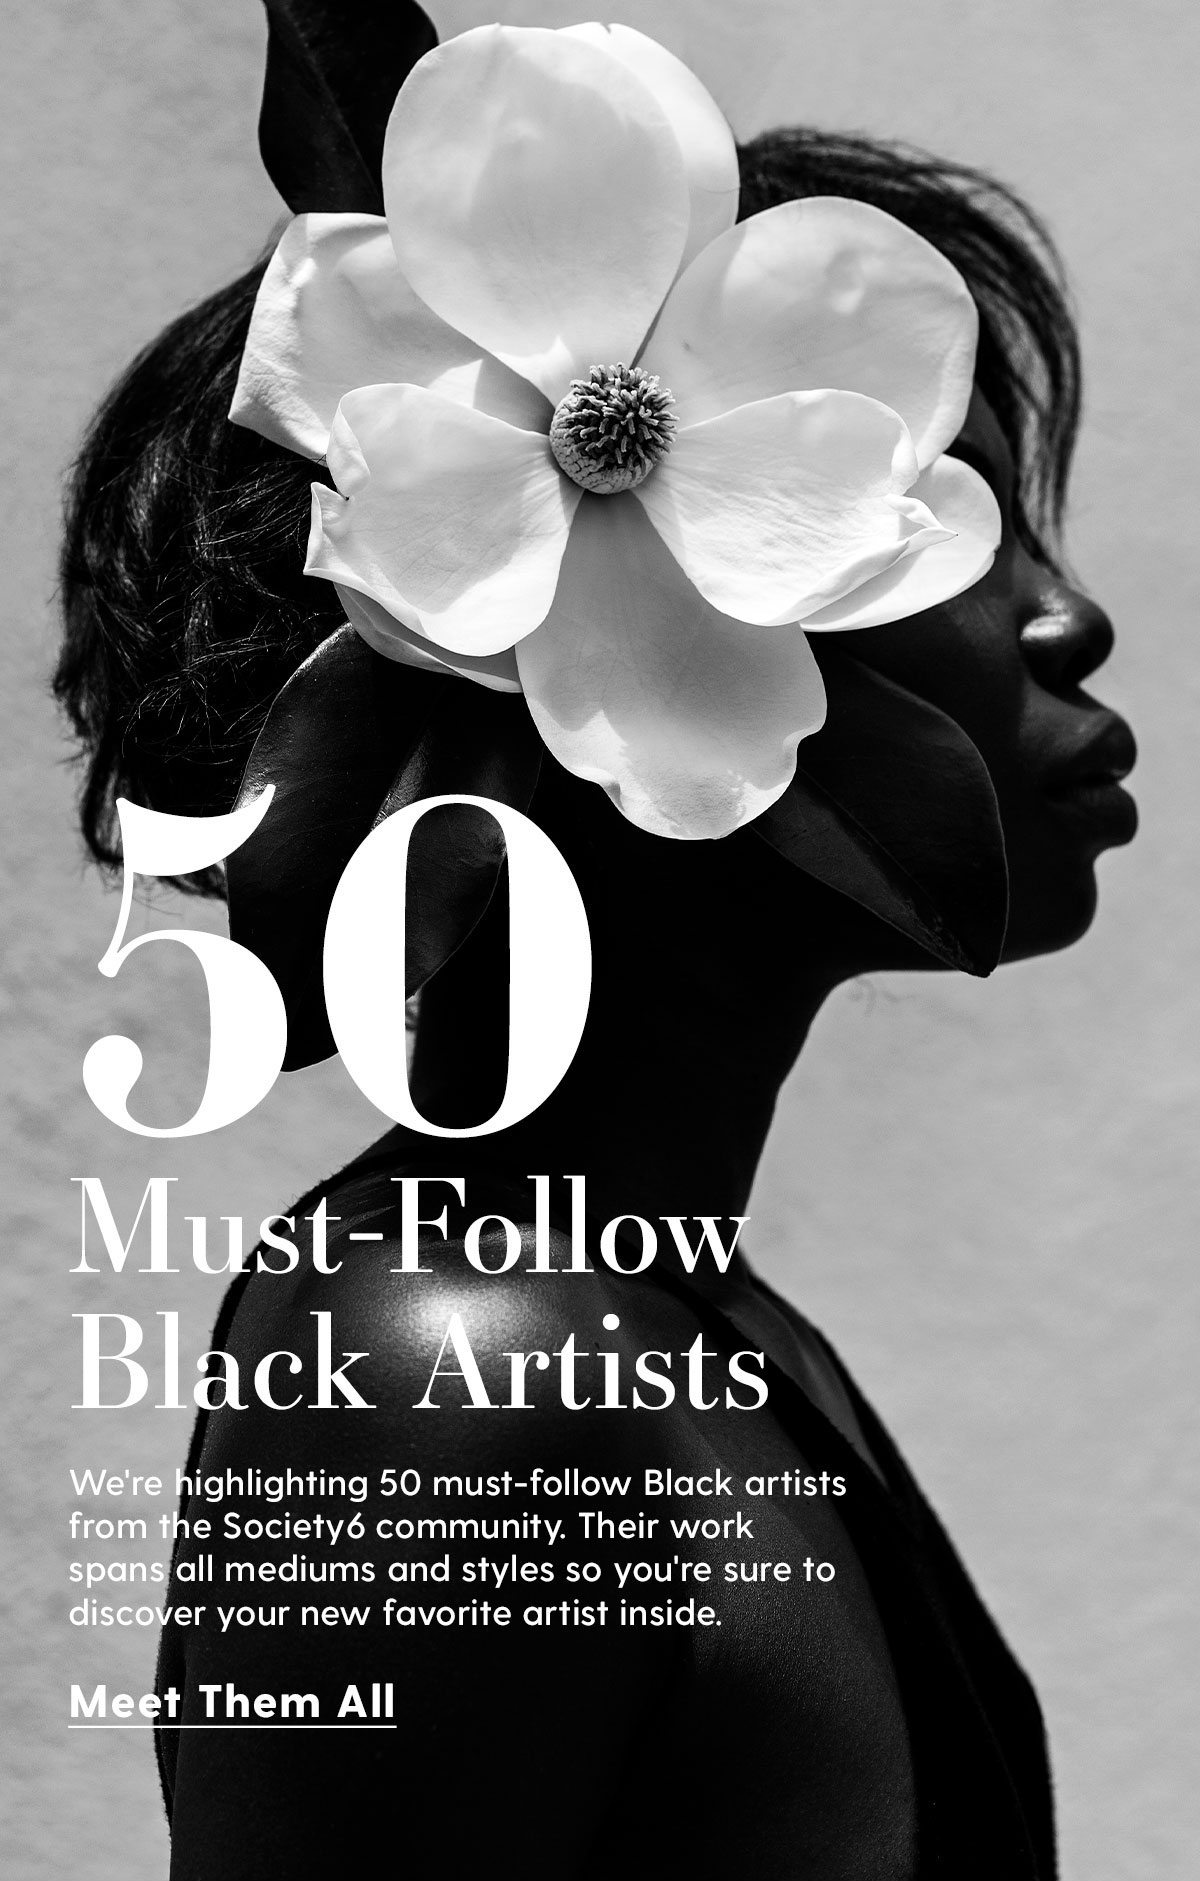 50 Must-Follow Black Artists: We're highlighting 50 must-follow Black artists from the Society6 community. Their work spans all mediums and styles so you're sure to discover your new favorite artist inside. Meet Them All